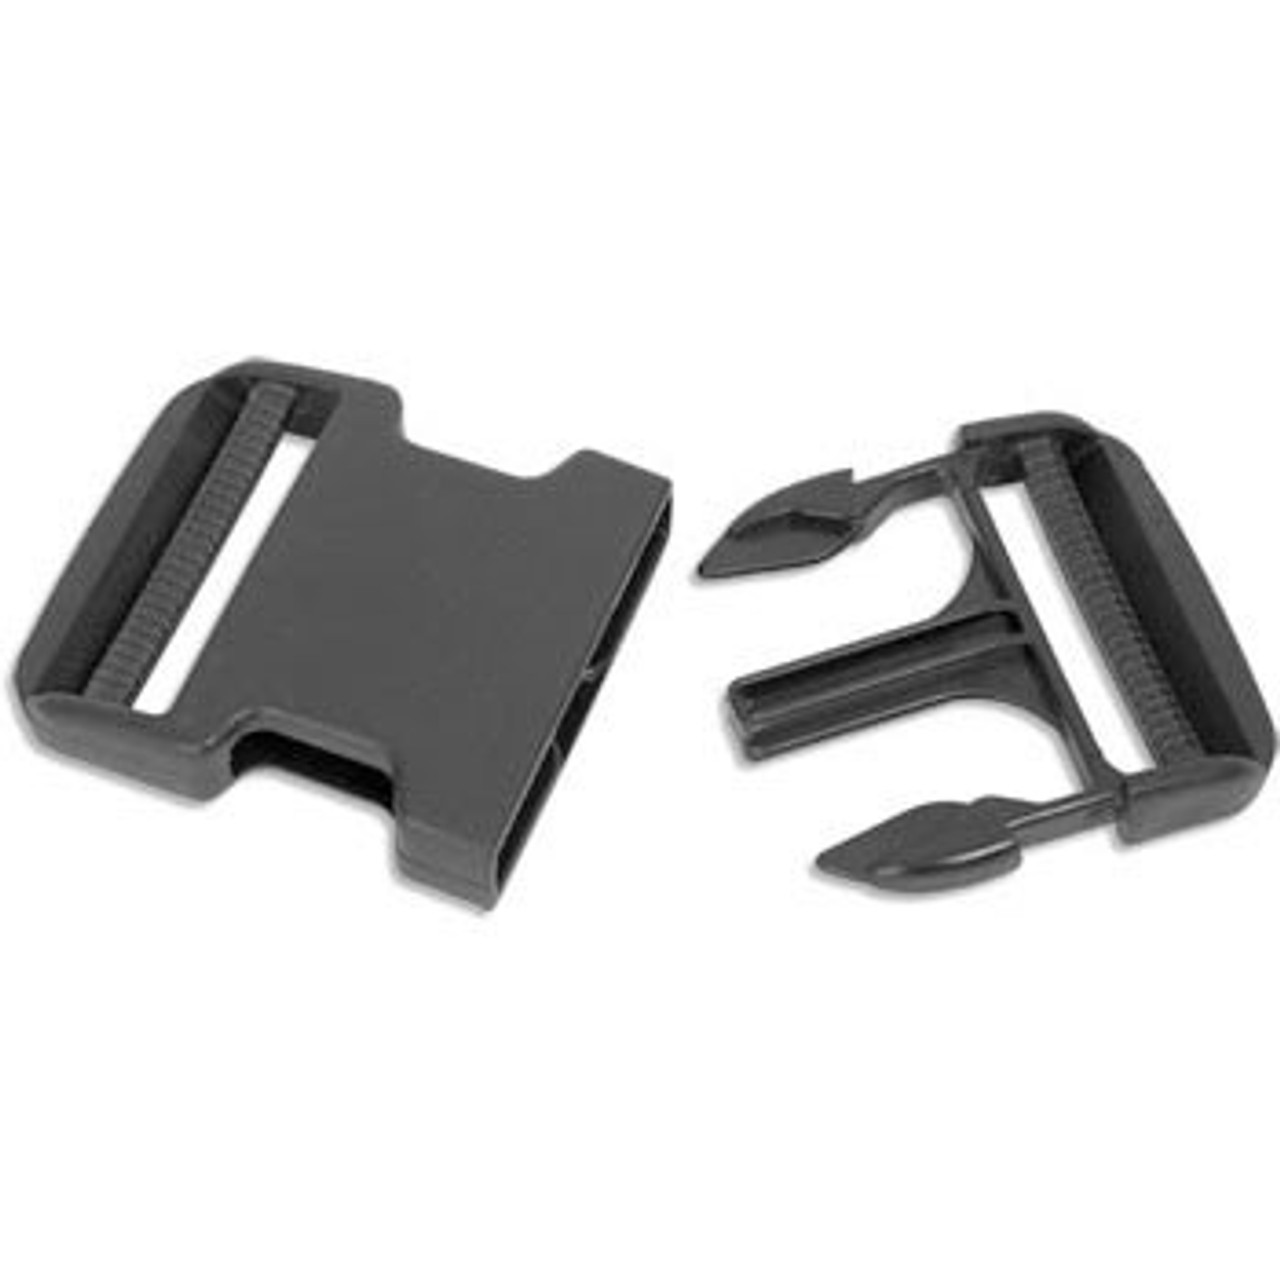 Plastic Buckle: What Is Side Release Buckle?